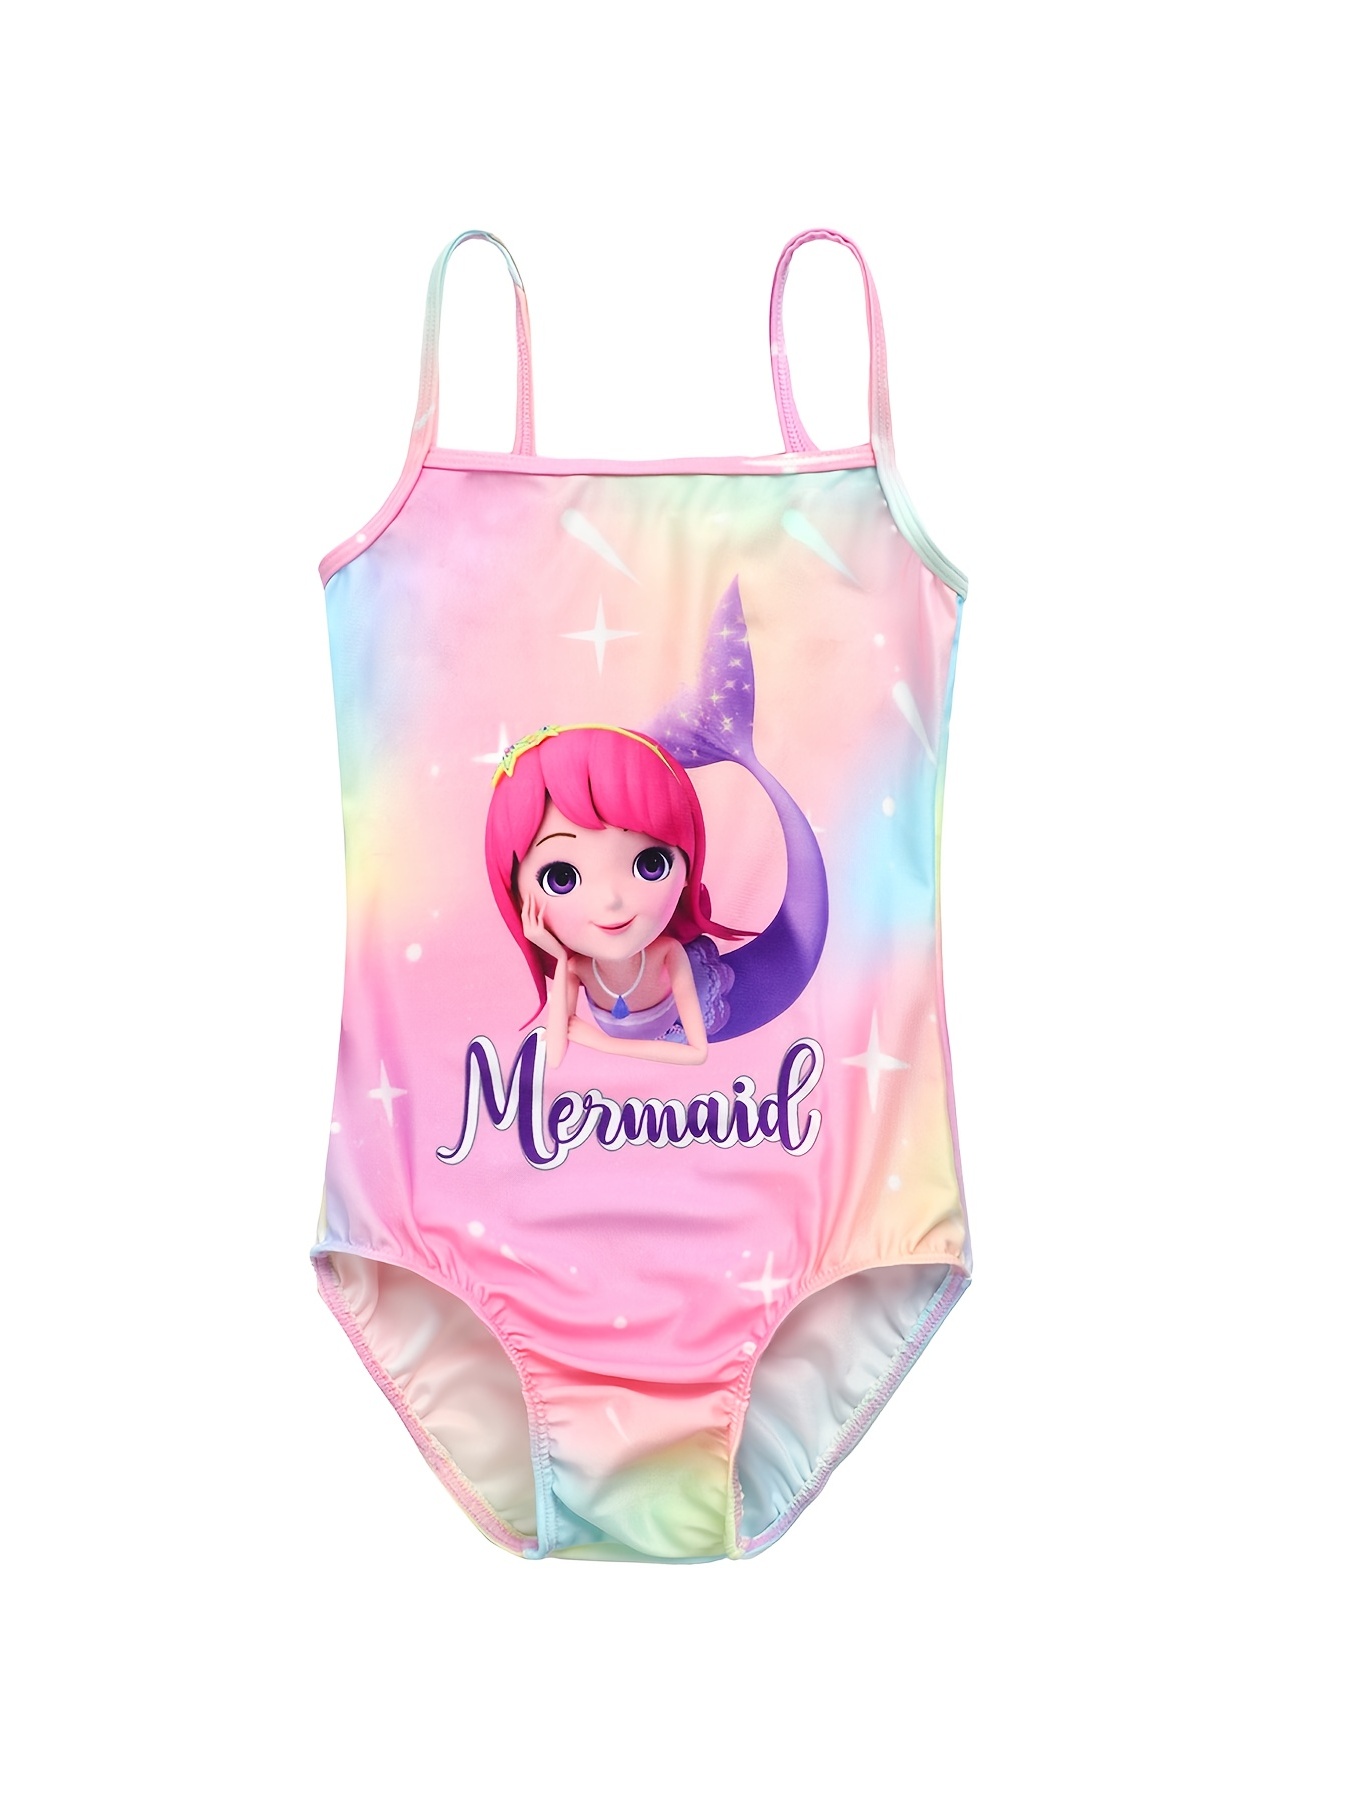 Girl's Sweet Ruffle Solid Color One-Piece Swimsuit Set - Polyester